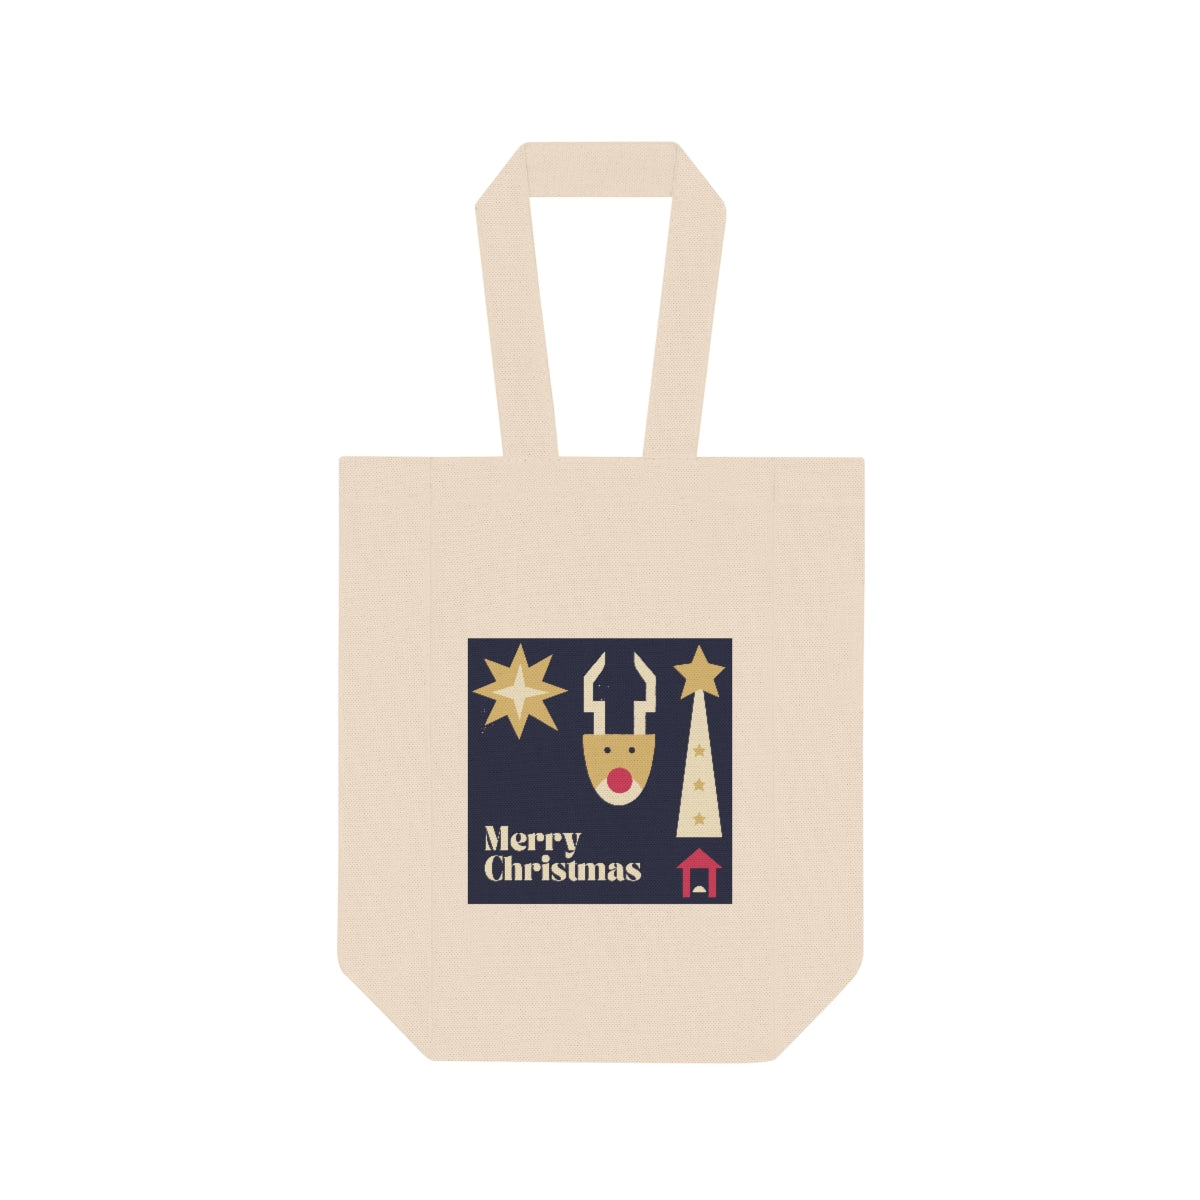 Merry Christmas - Double Wine Tote Bag